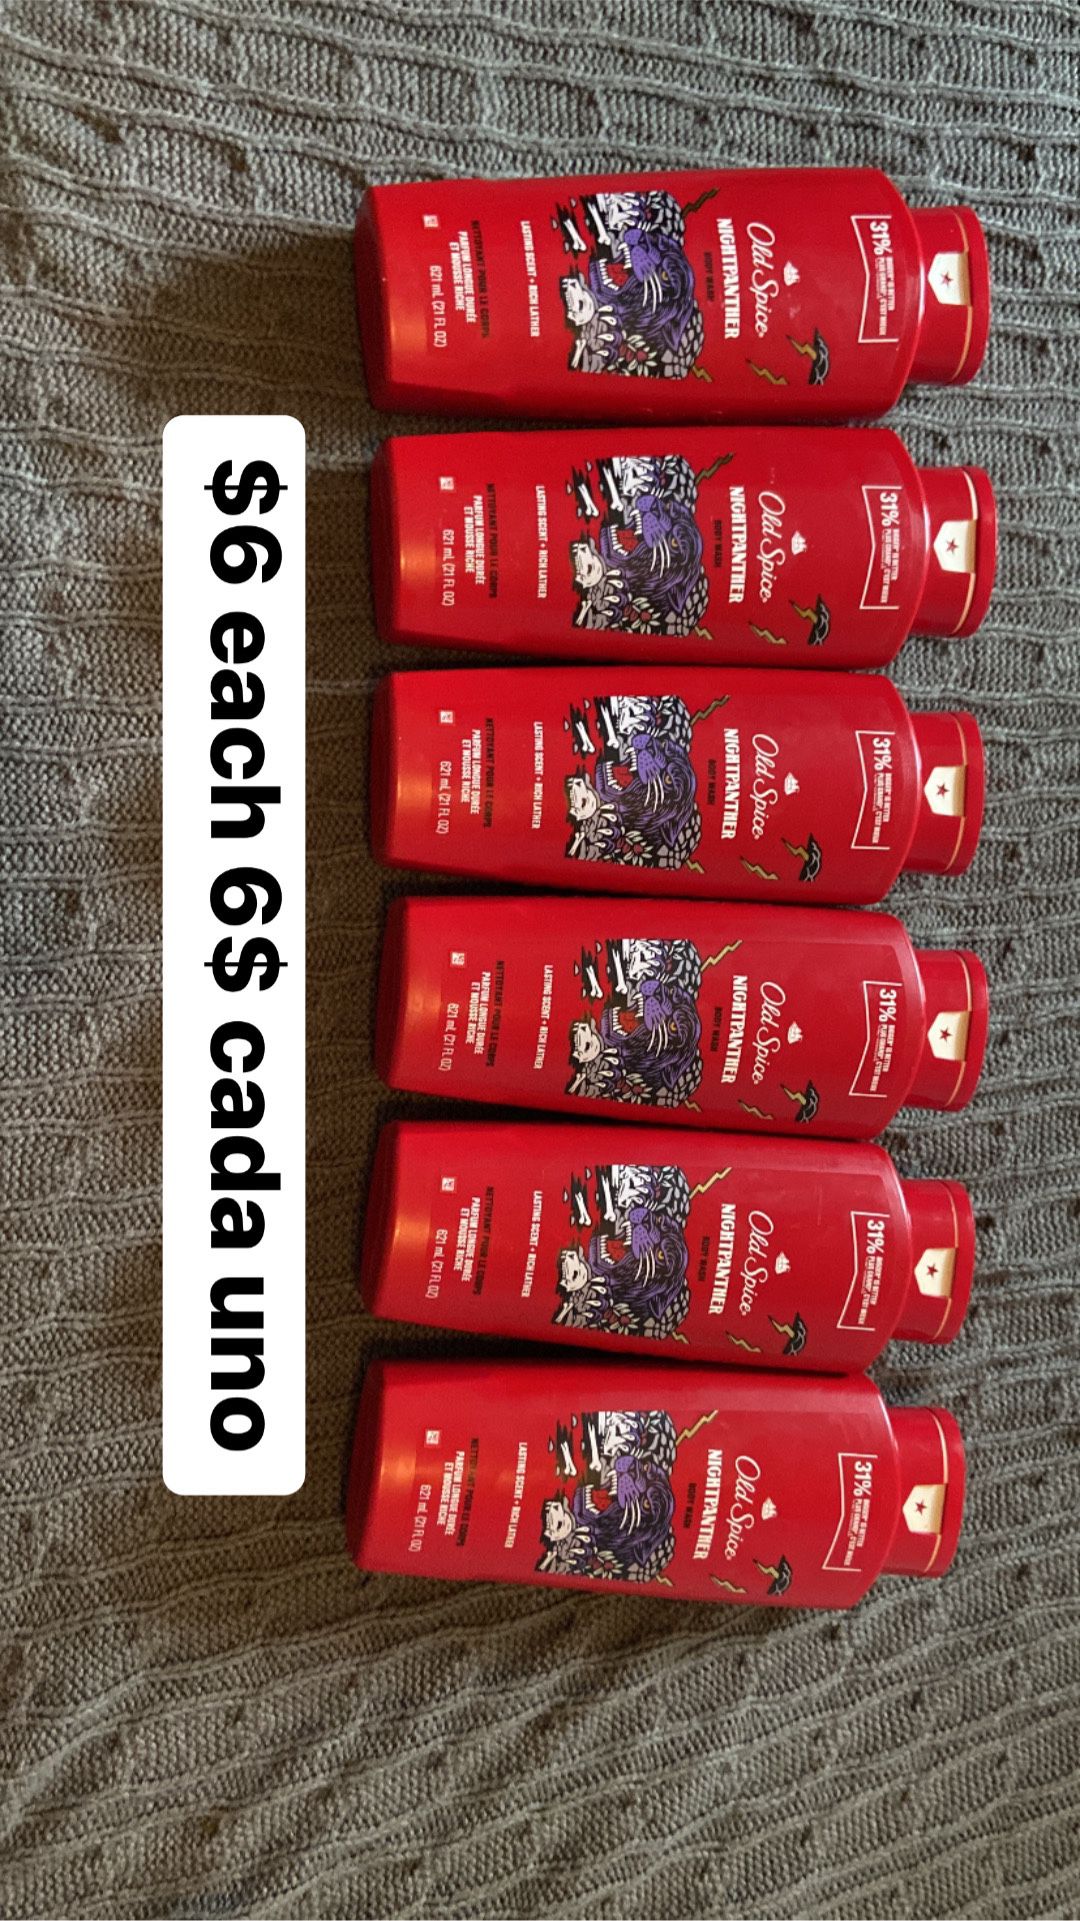 Old Spice Body Wash